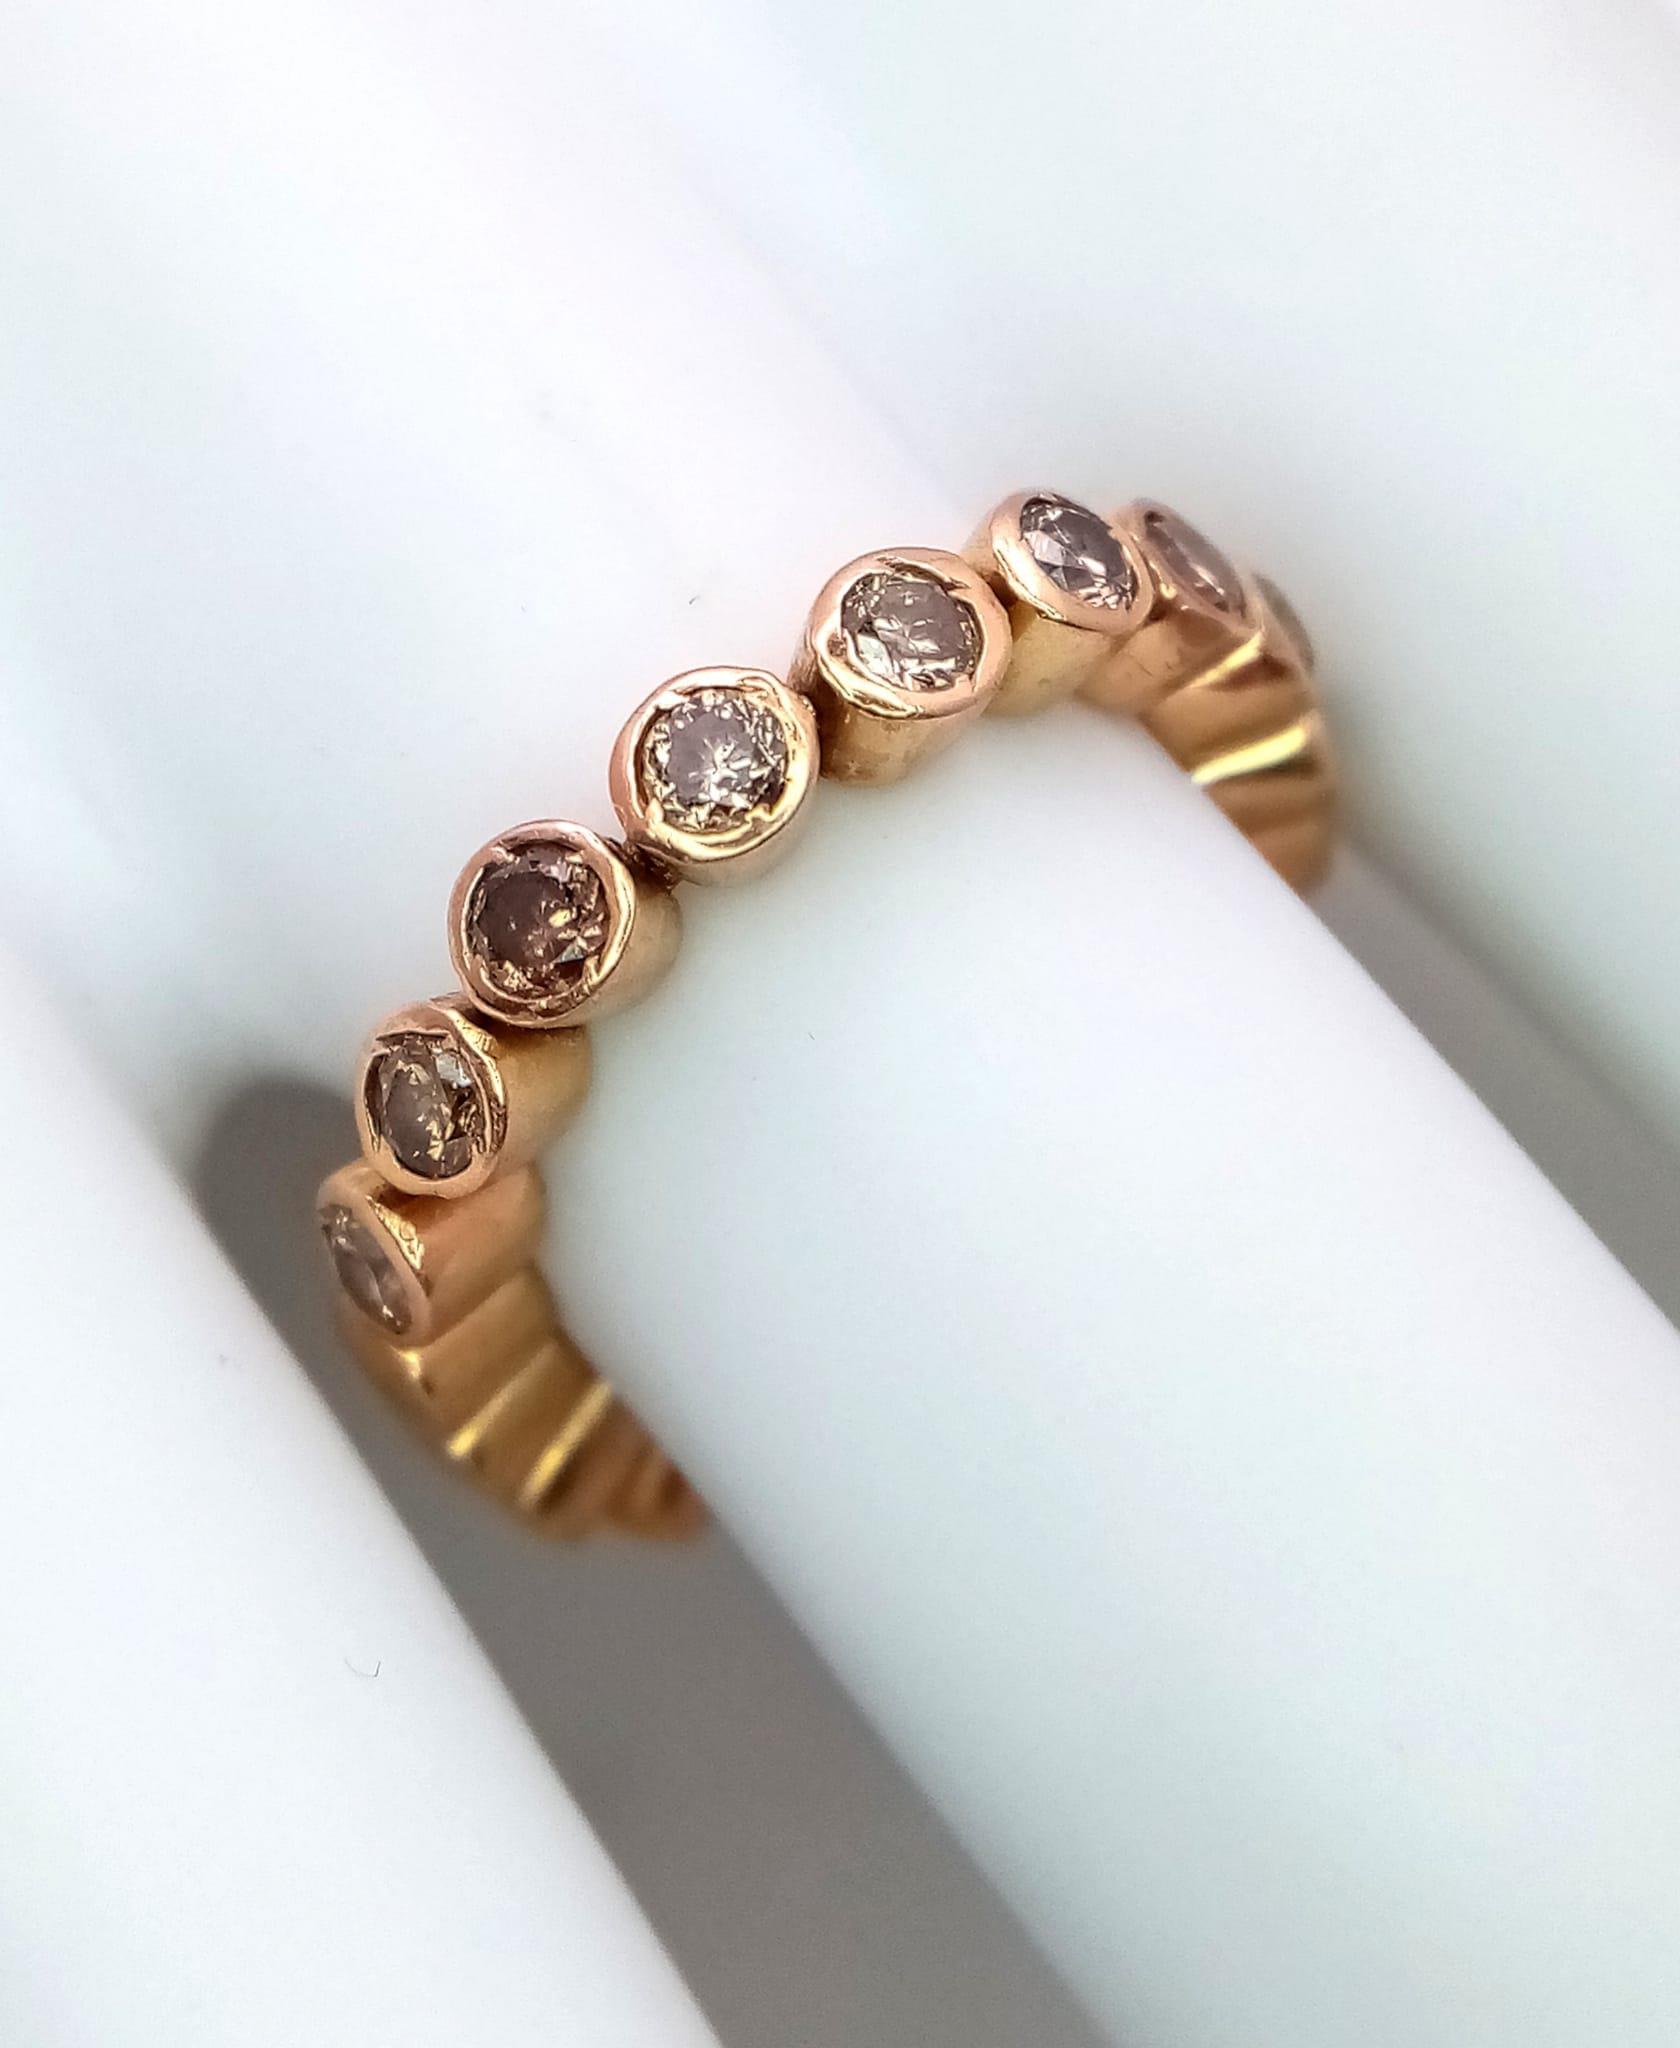 An 18K Rose Gold Articulated Diamond Half-Eternity Ring. Size Q. 5g total weight. Ref: 015884 - Image 2 of 5